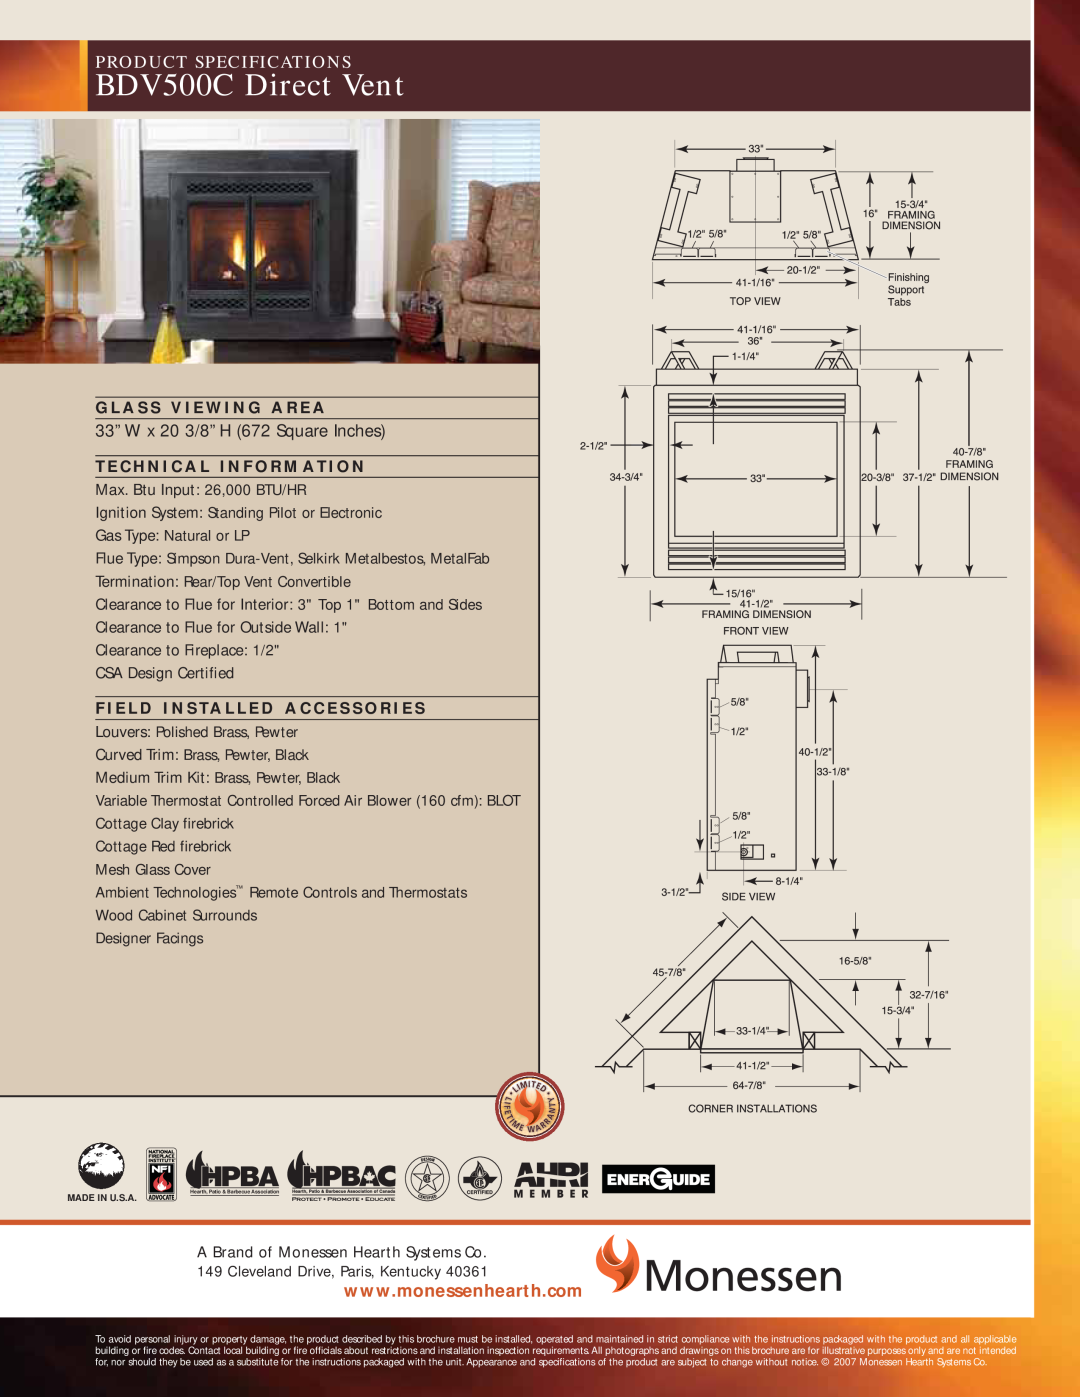 Monessen Hearth specifications BDV500C Direct Vent, Product Specifications 